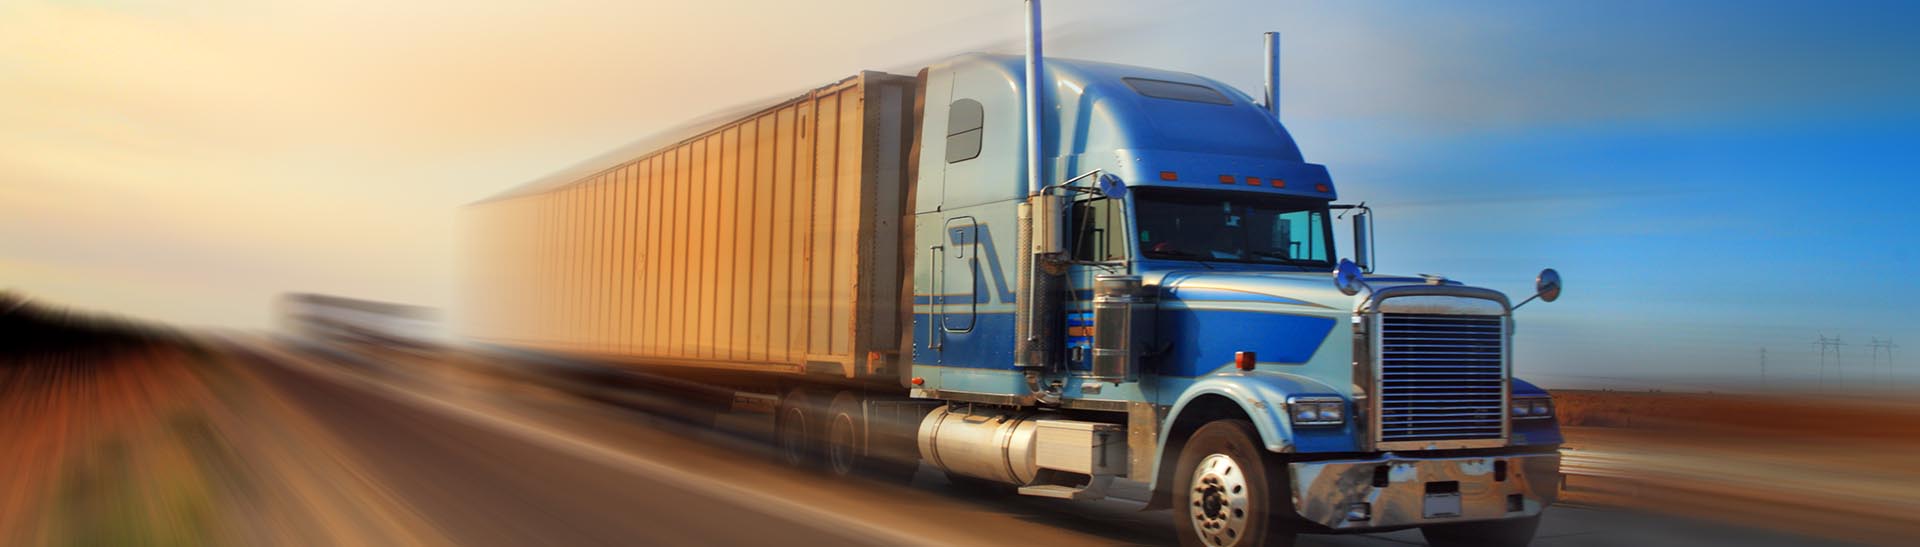 Milwaukee Trucking Company, Trucking Services and Freight Forwarding Services